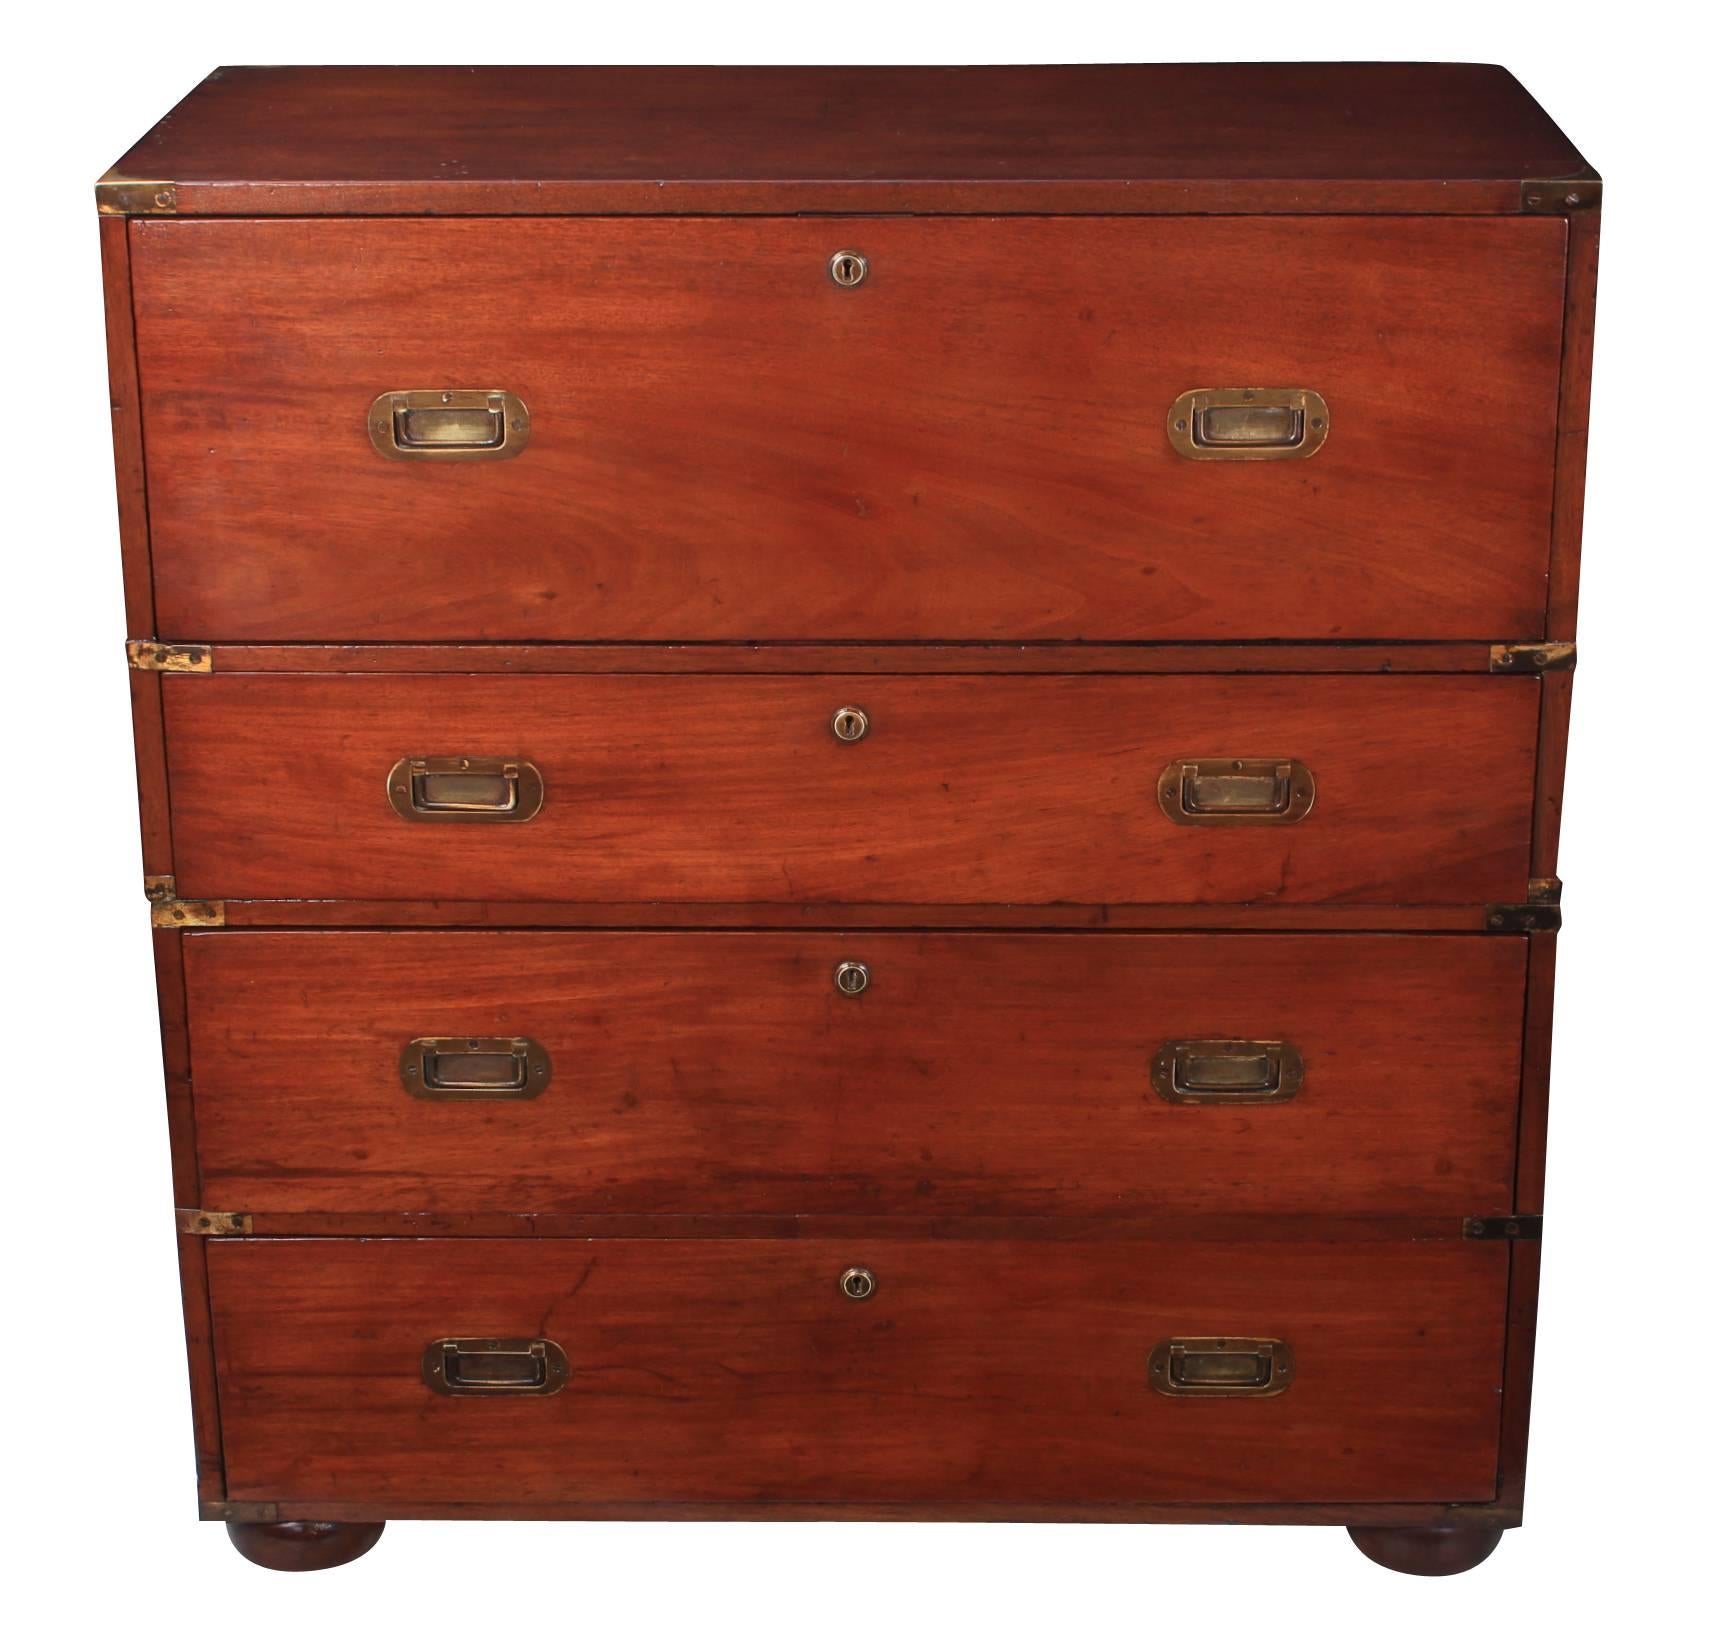 English, circa 1850.
This mahogany military chest is in good condition.
Consisting of four drawers, with a deep top drawer.
Quality solid pine dovetailed construction with recessed brass military handles.
Brass corners and brass straps, typical